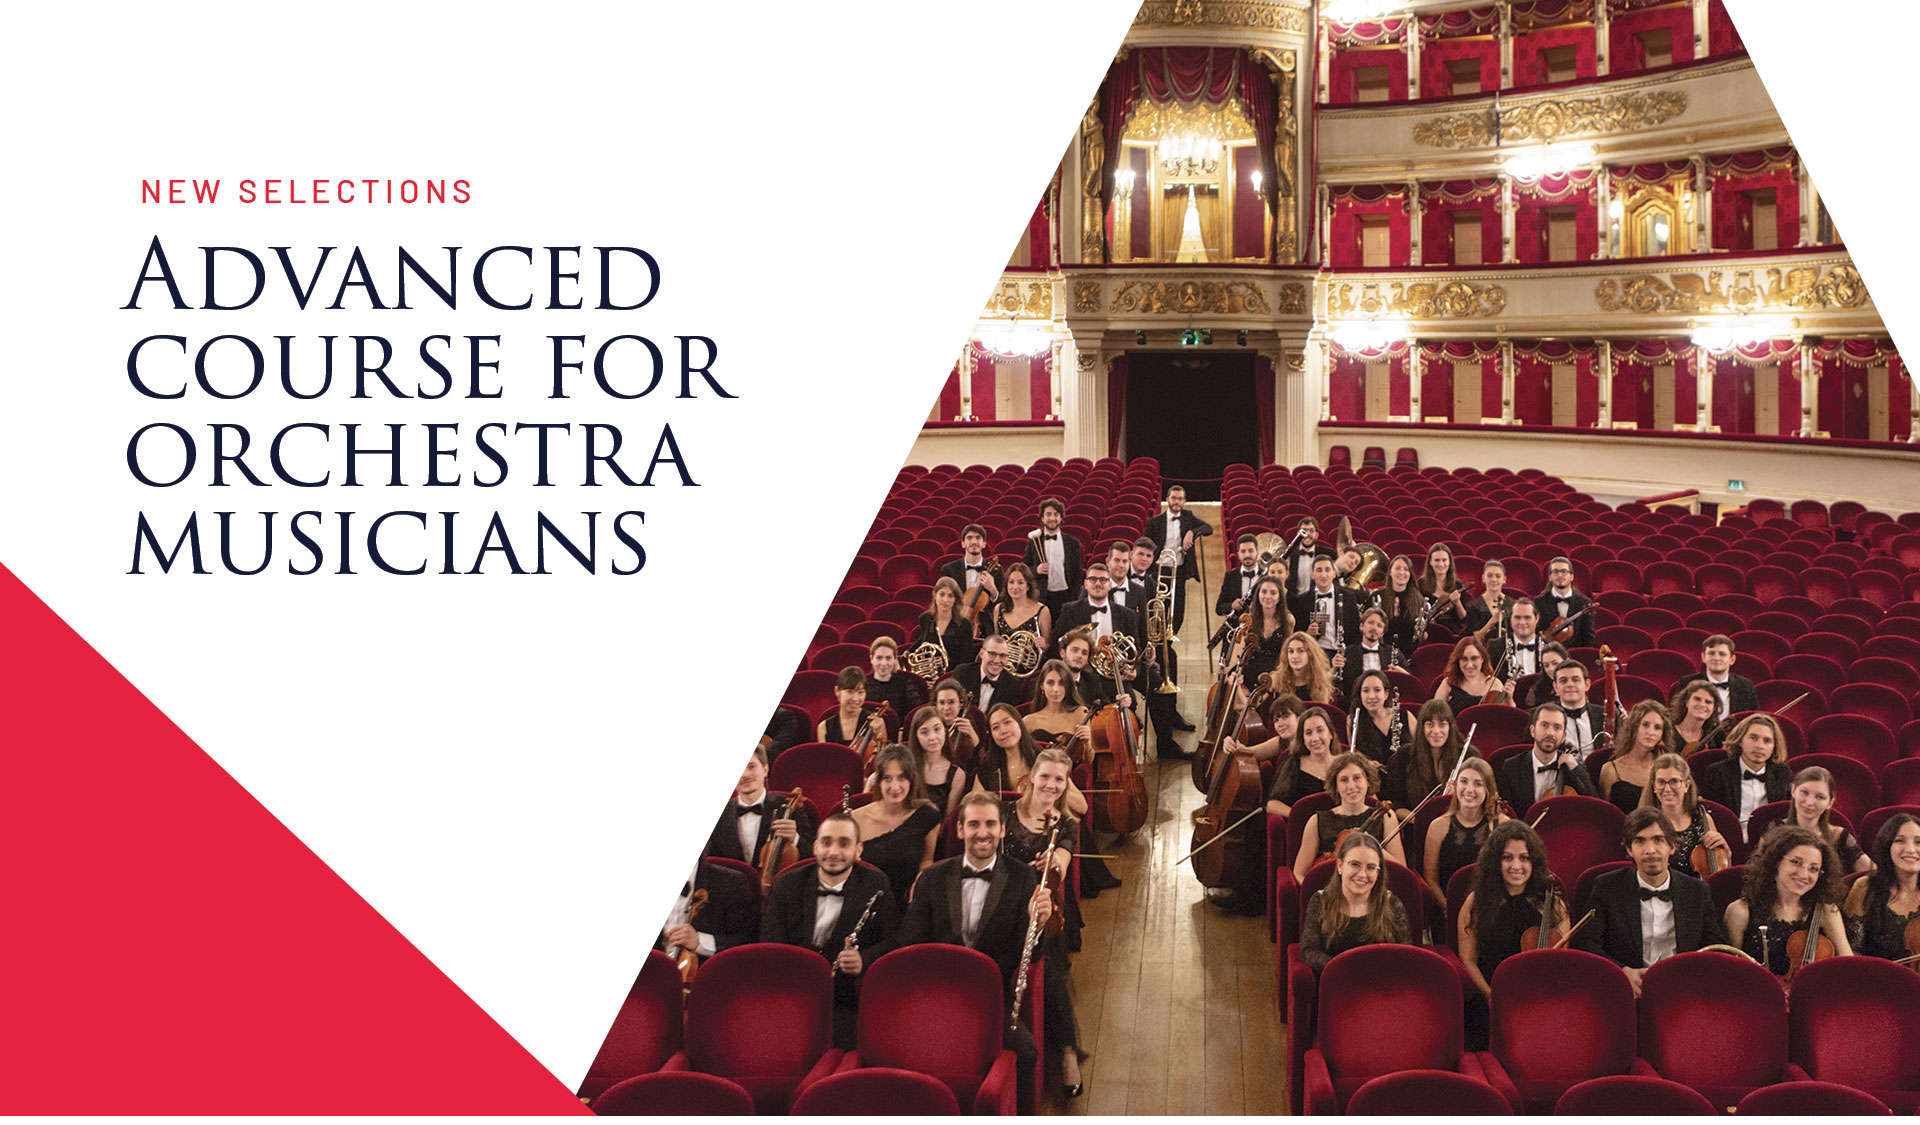 a new edition of the advanced course for orchestra musicians